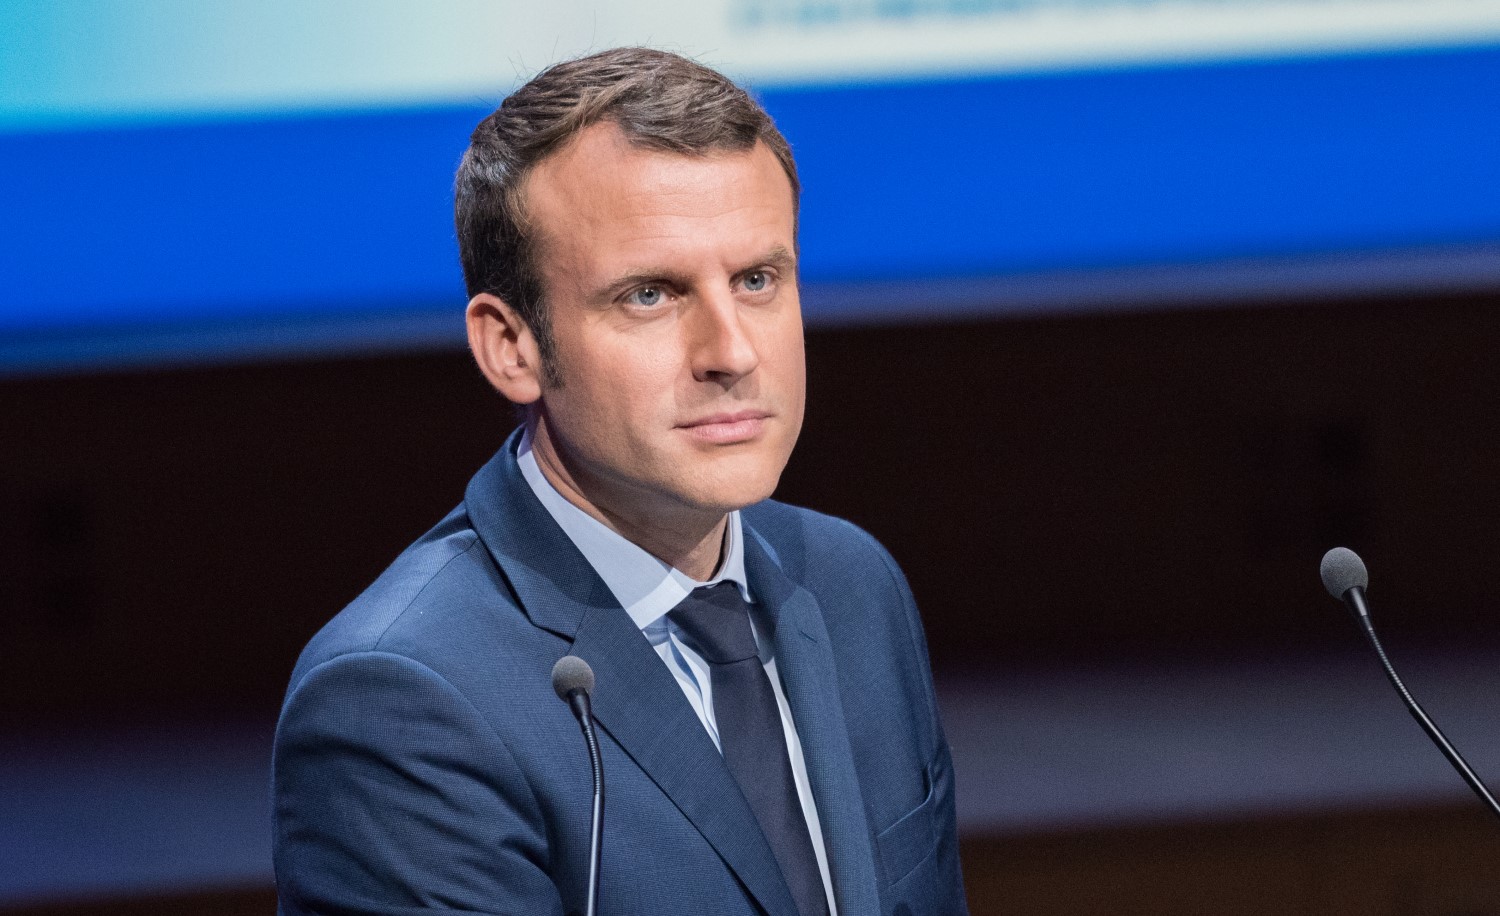 French President Says Blockchain Could Put Europe At ‘Vanguard’ Of Innovation